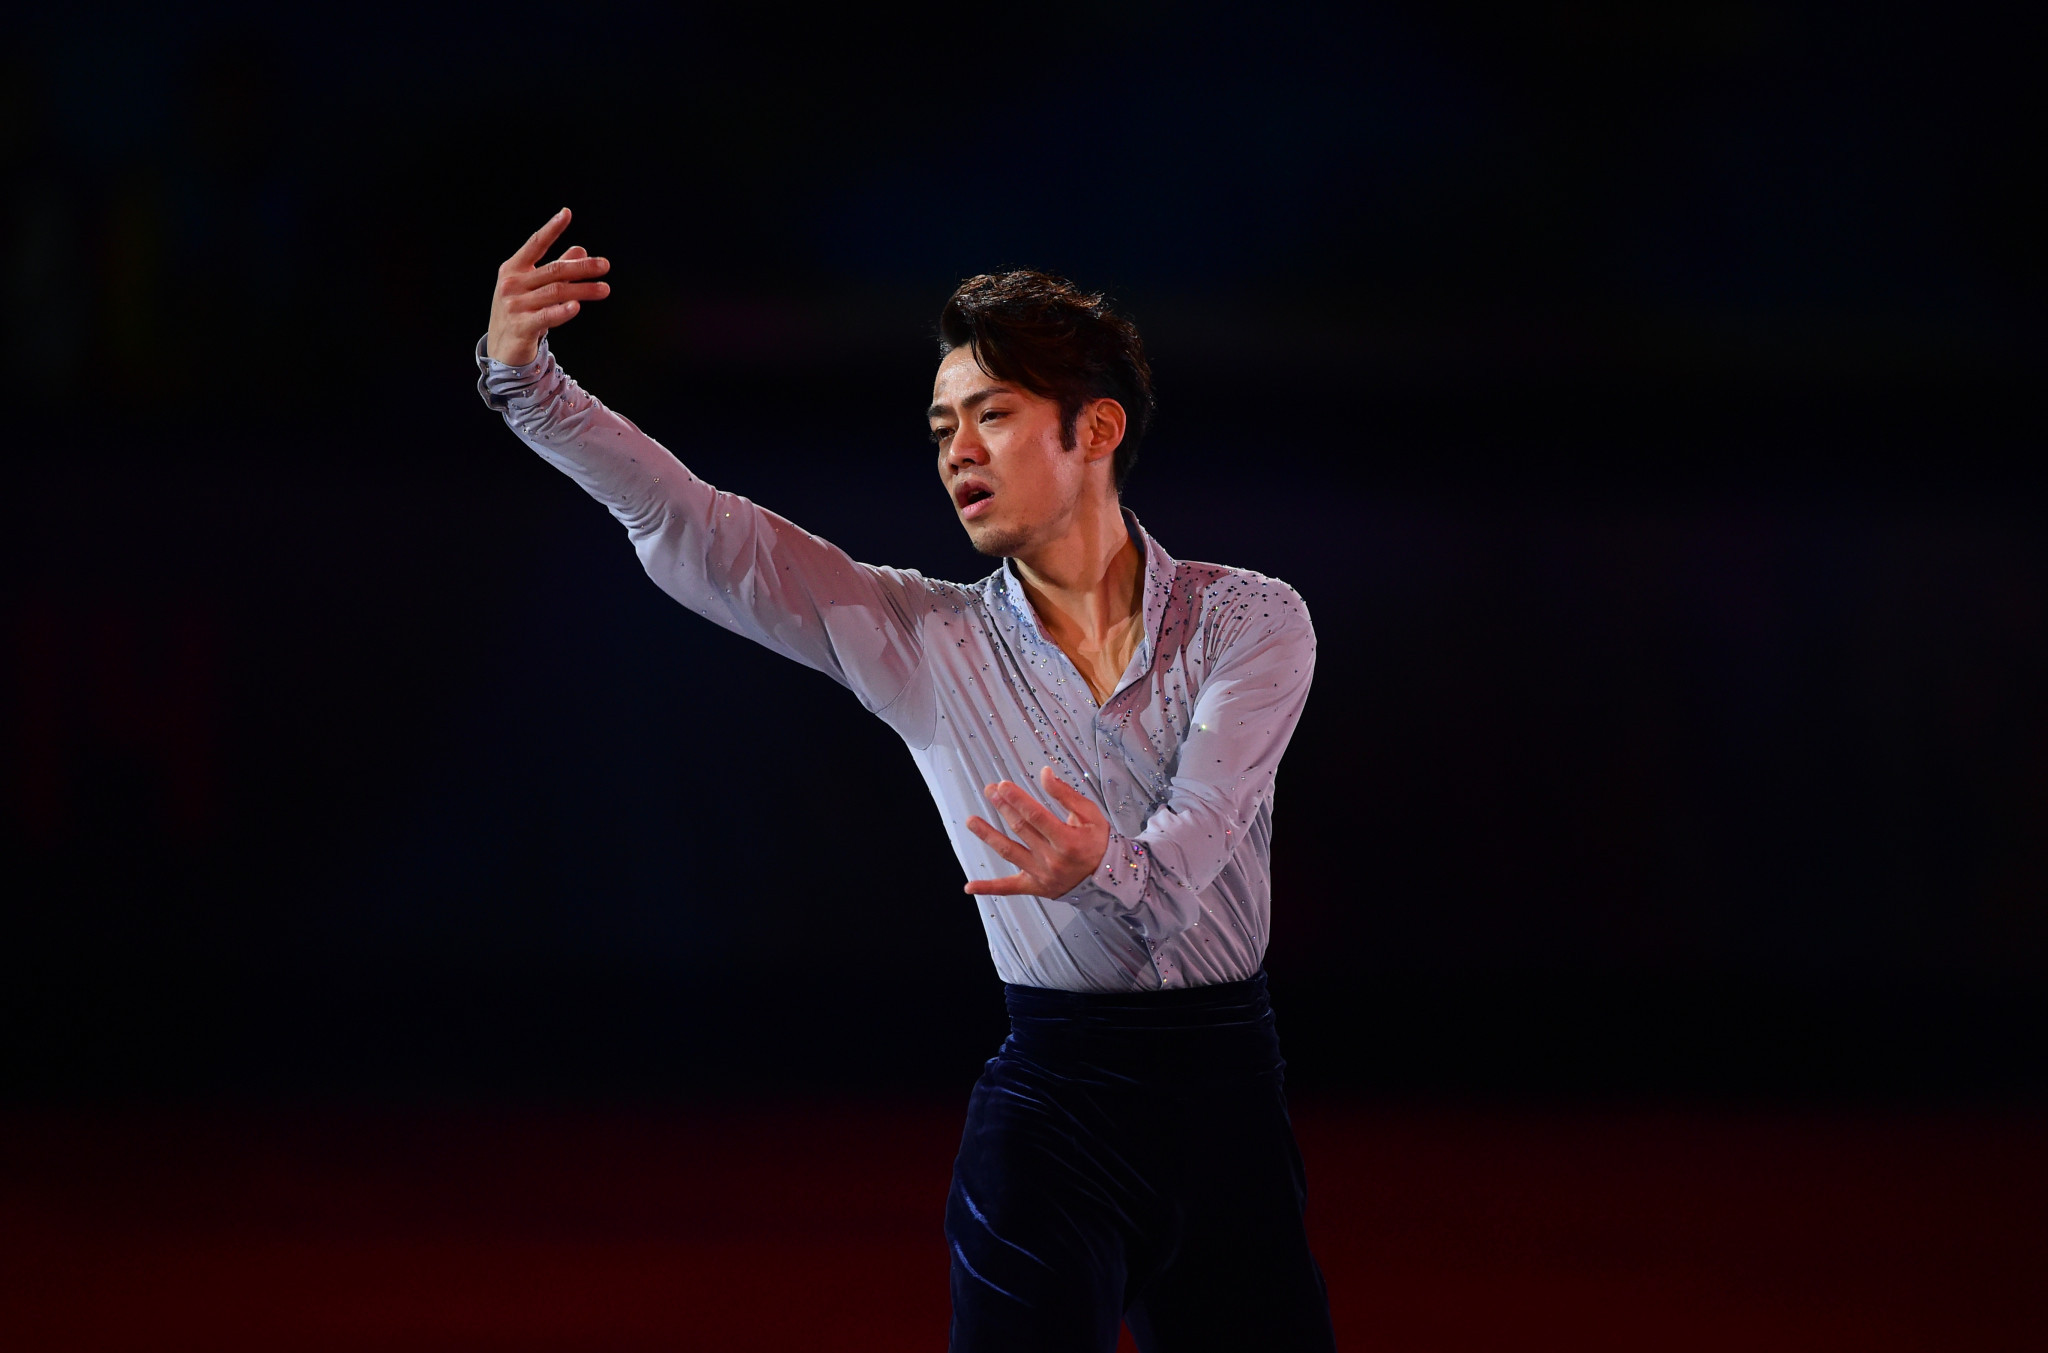 Japanese figure skater Daisuke Takahashi performing at the Sochi 2014 Winter Olympics before he retired ©Getty Images 